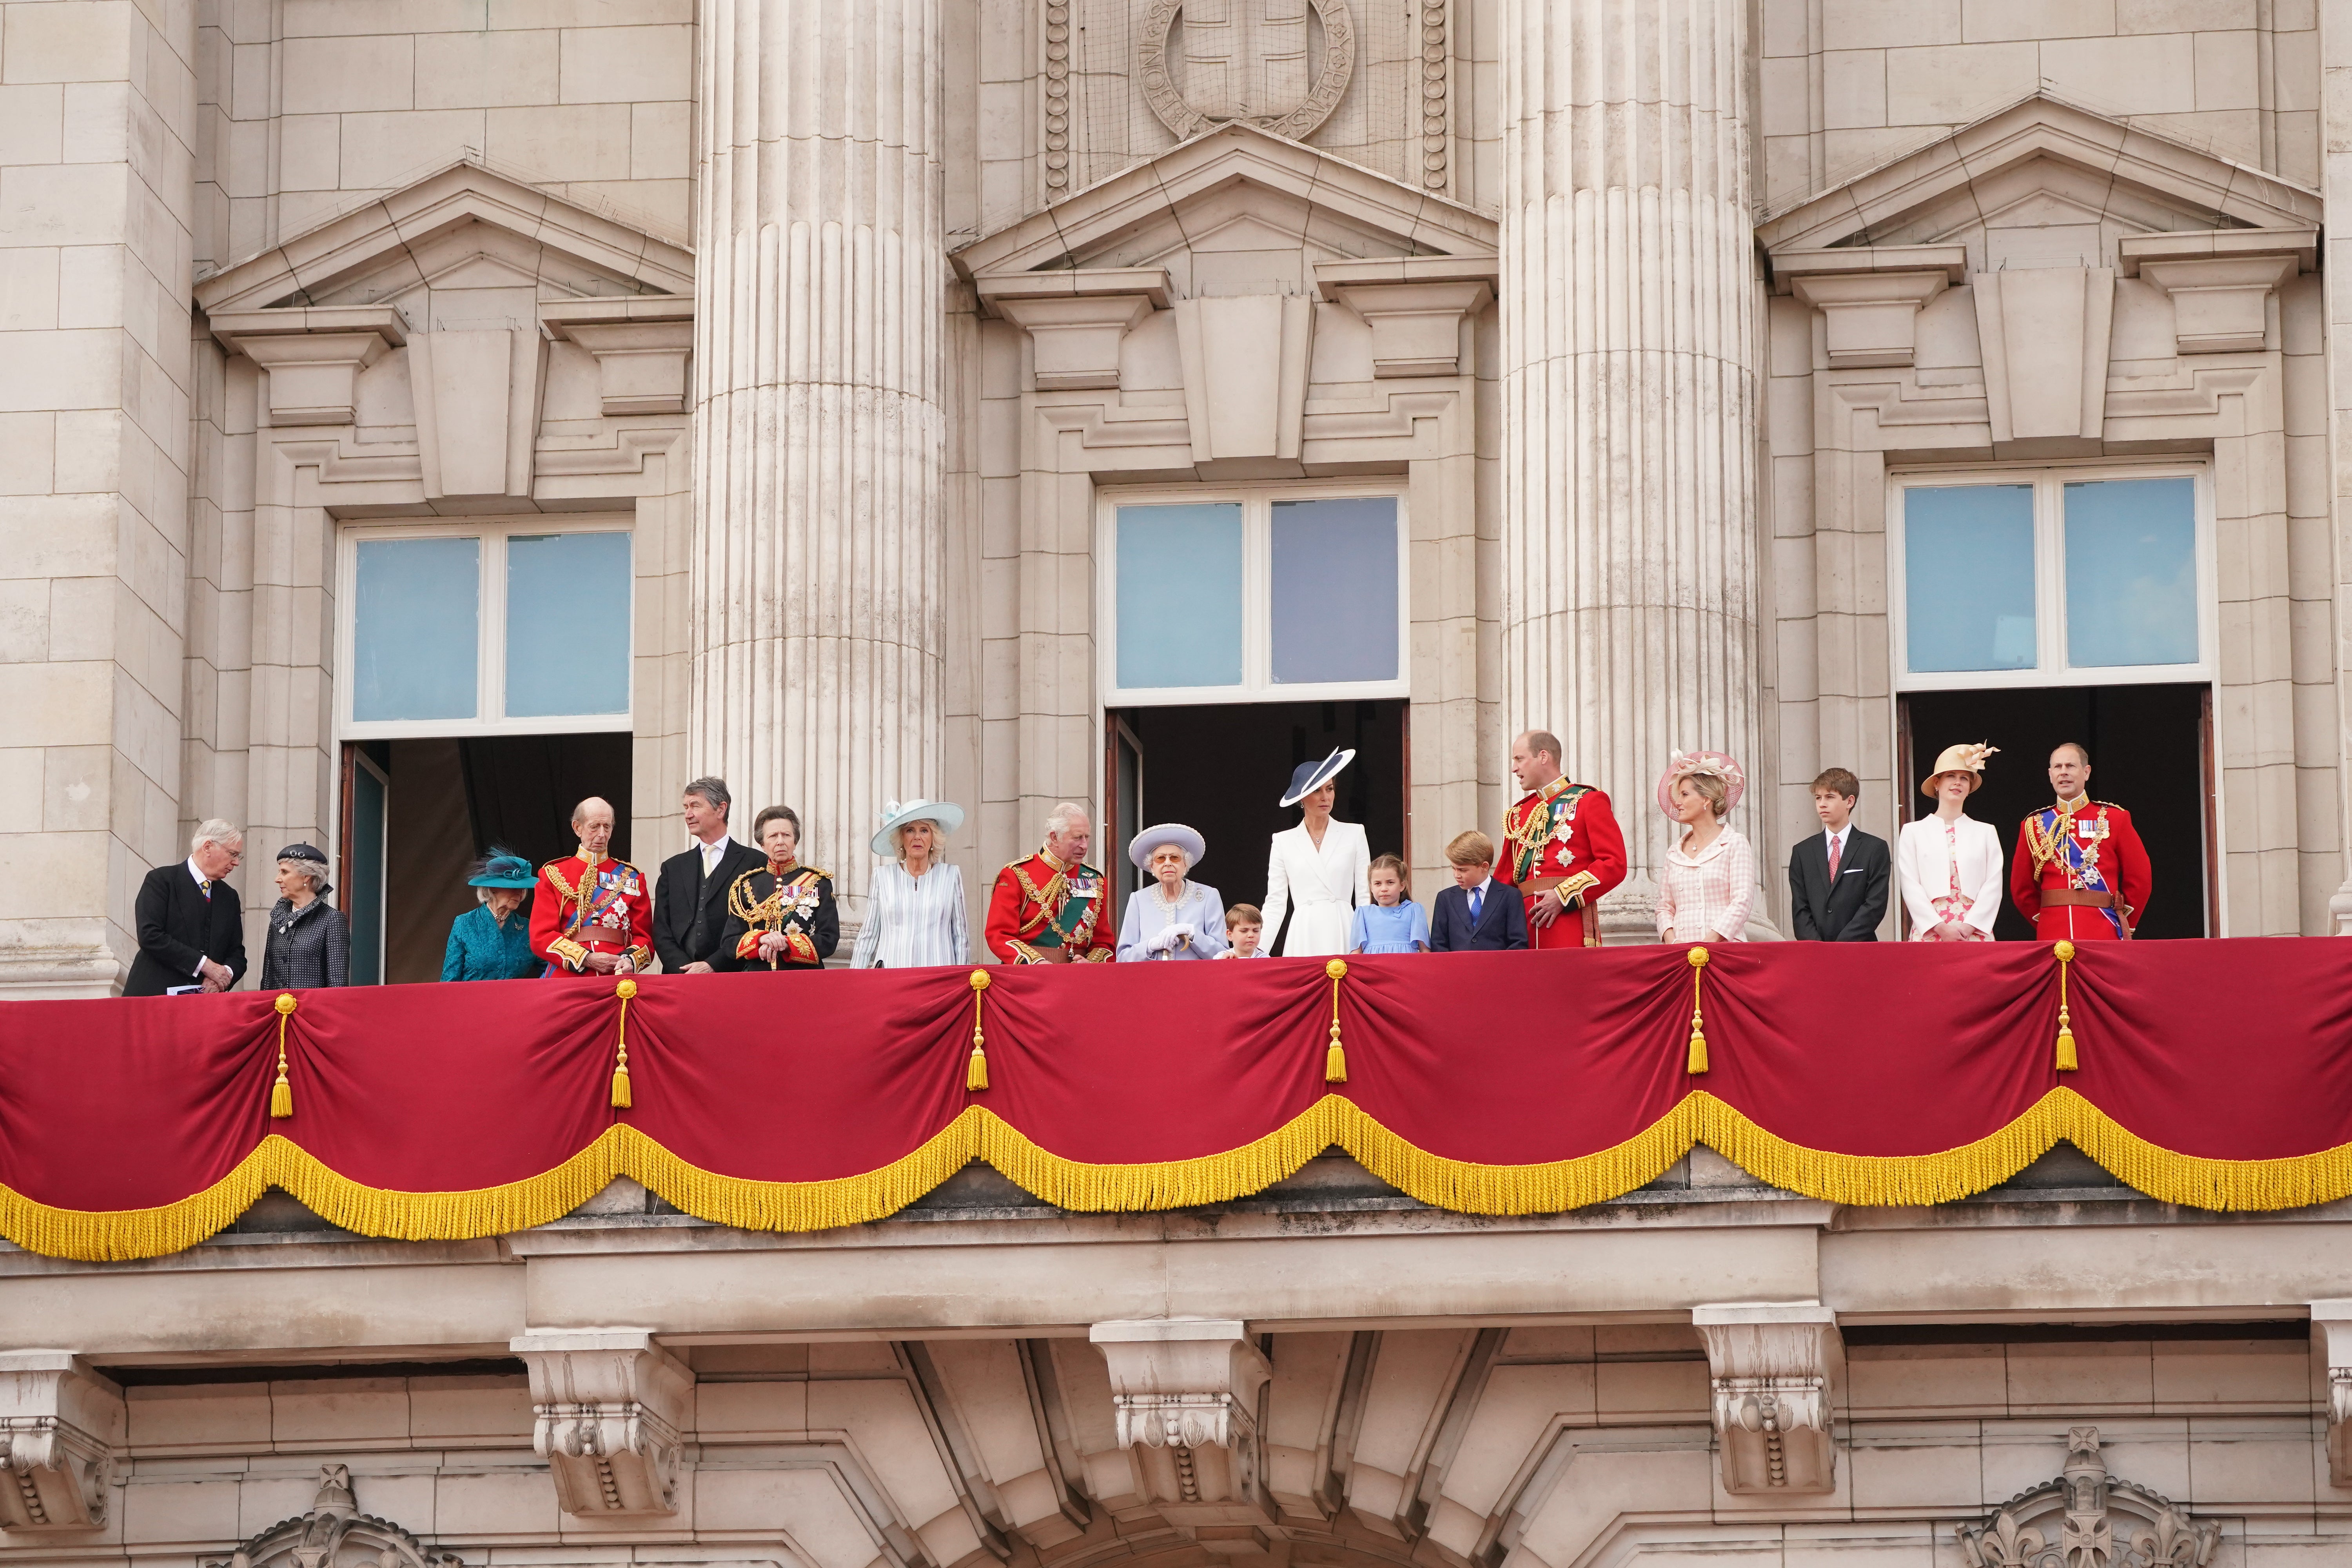 The Duke of Gloucester, Duchess of Gloucester, Princess Alexandra, Duke of Kent, Vice Admiral Sir Tim Laurence , the Princess Royal, the Duchess of Cornwall, the Prince of Wales , Queen Elizabeth II, the Duchess of Cambridge, Princess Charlotte, Prince Louis, Prince George, the Duke of Cambridge, the Countess of Wessex, James Viscount Severn, Lady Louise Windsor, and the Earl of Wessex on the balcony of Buckingham Palace (Jonathan Brady/PA)